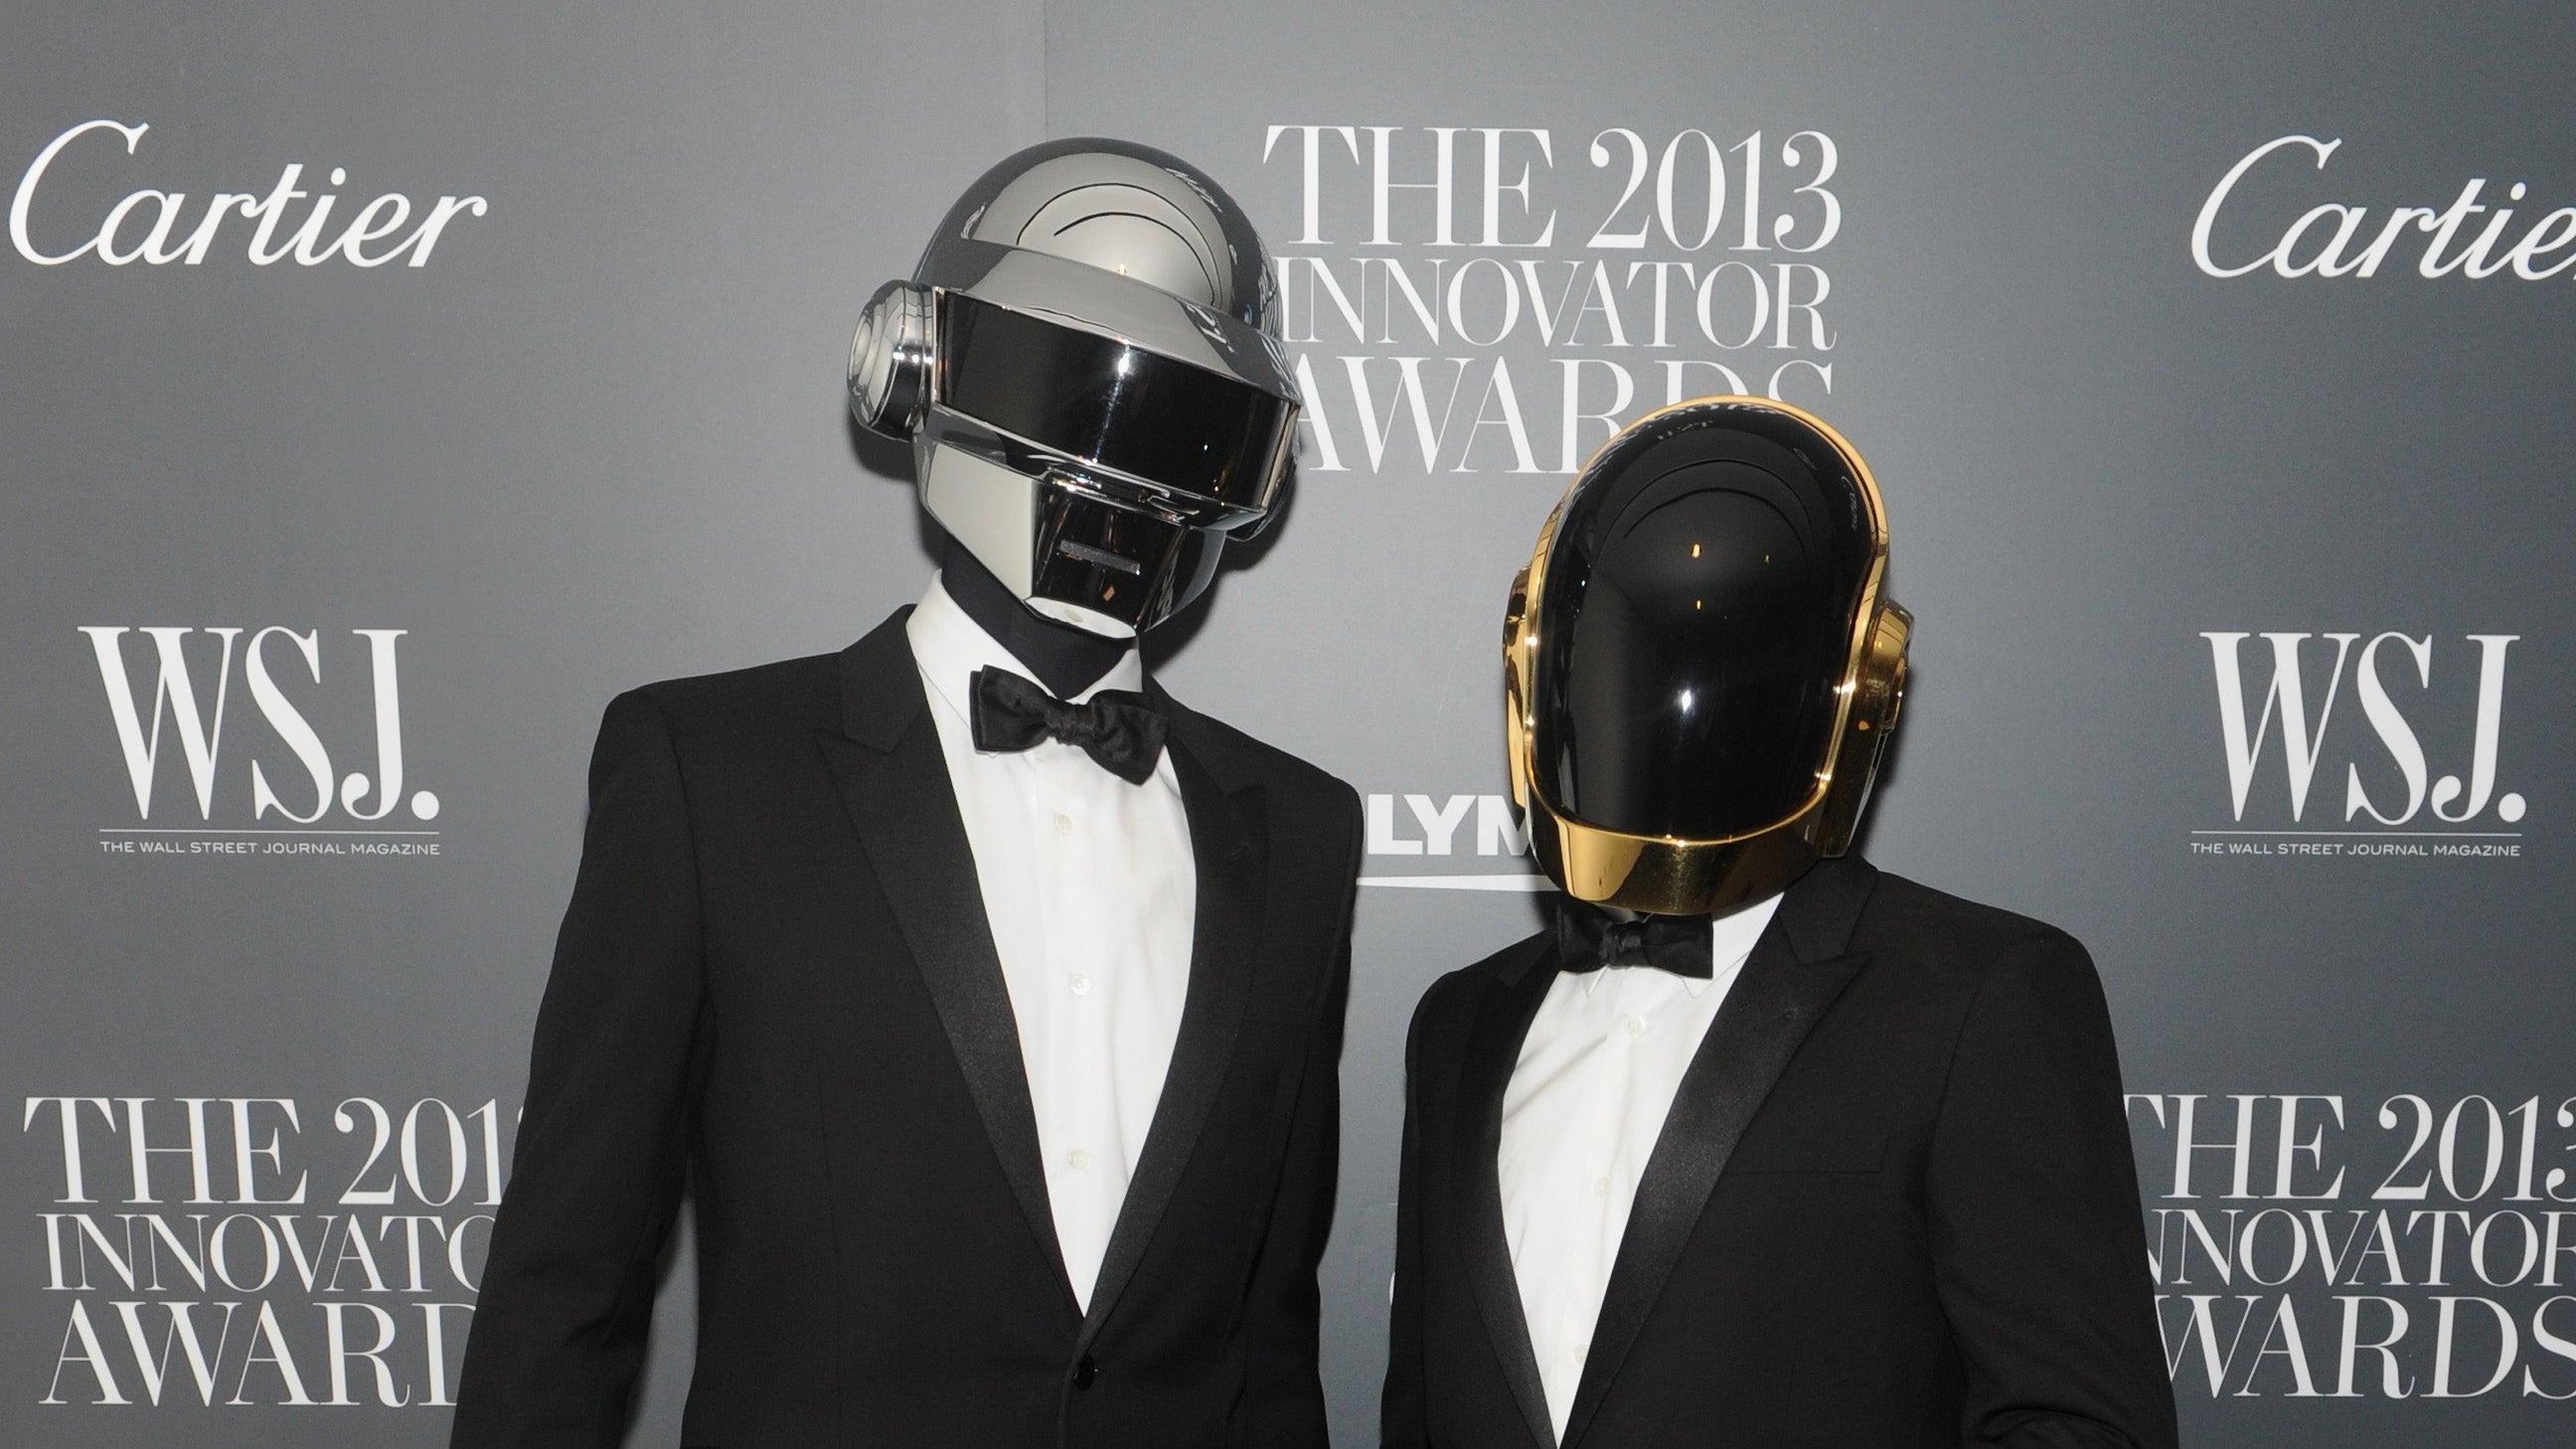 A new book about Daft Punk's Discovery era is in the works